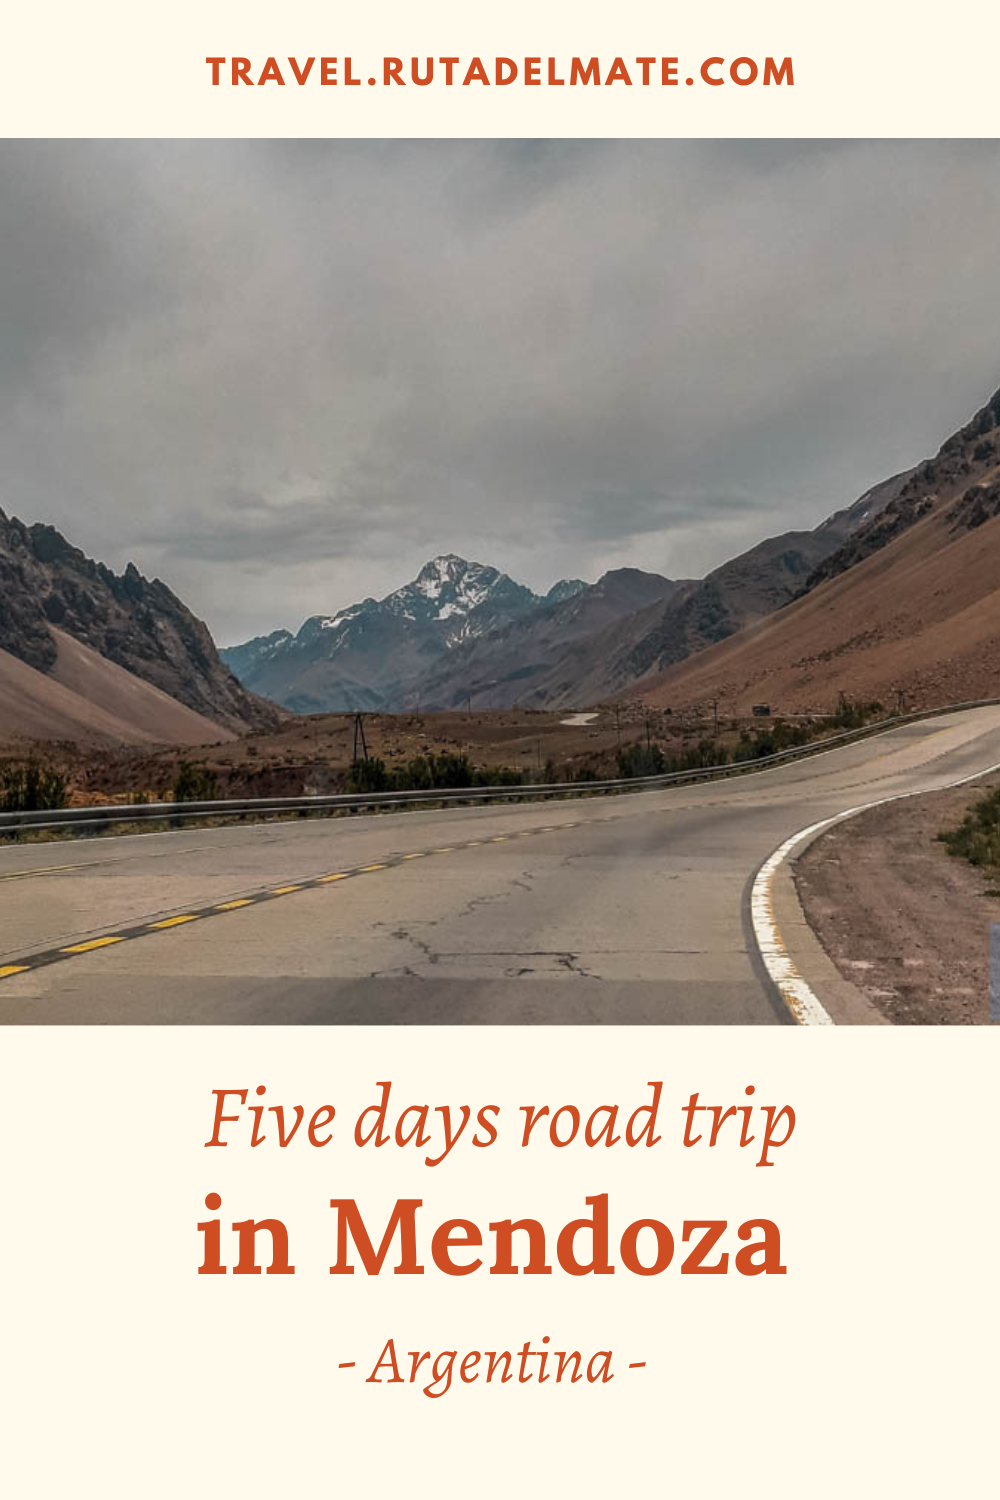 Things to do in Mendoza in 5 days